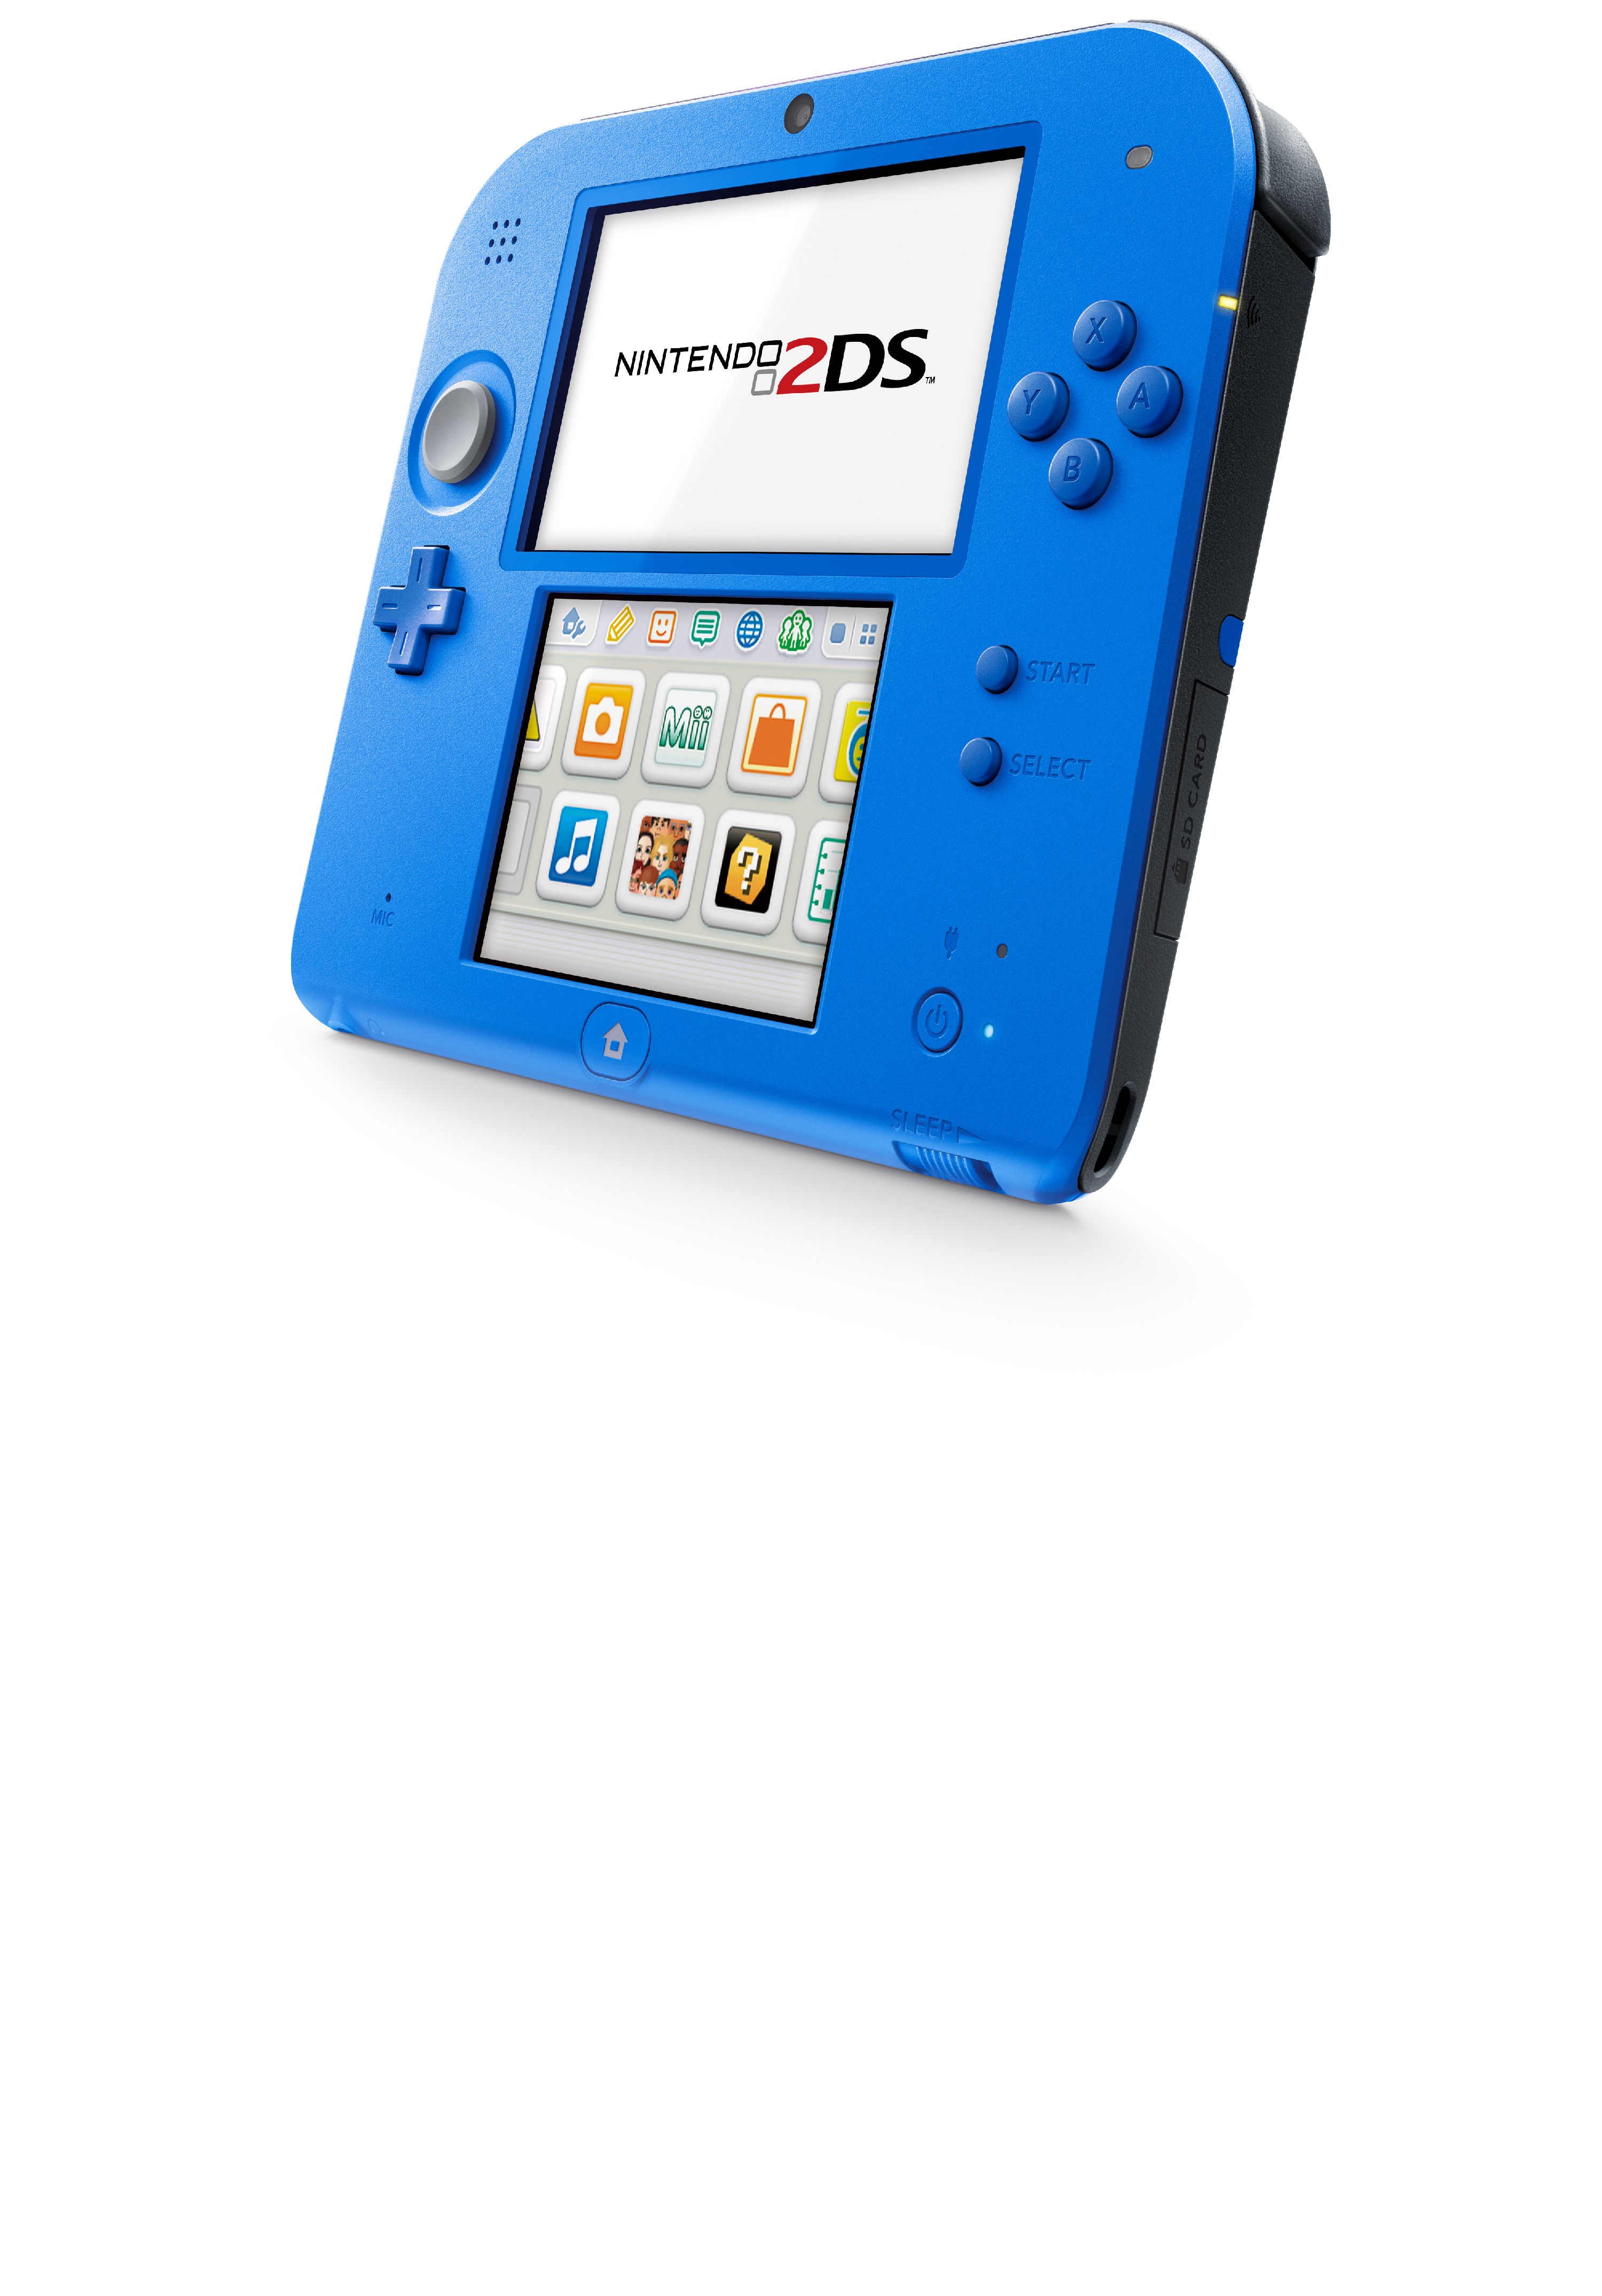 Nintendo 2DS System with New Super Mario 2, Blue - image 4 of 6